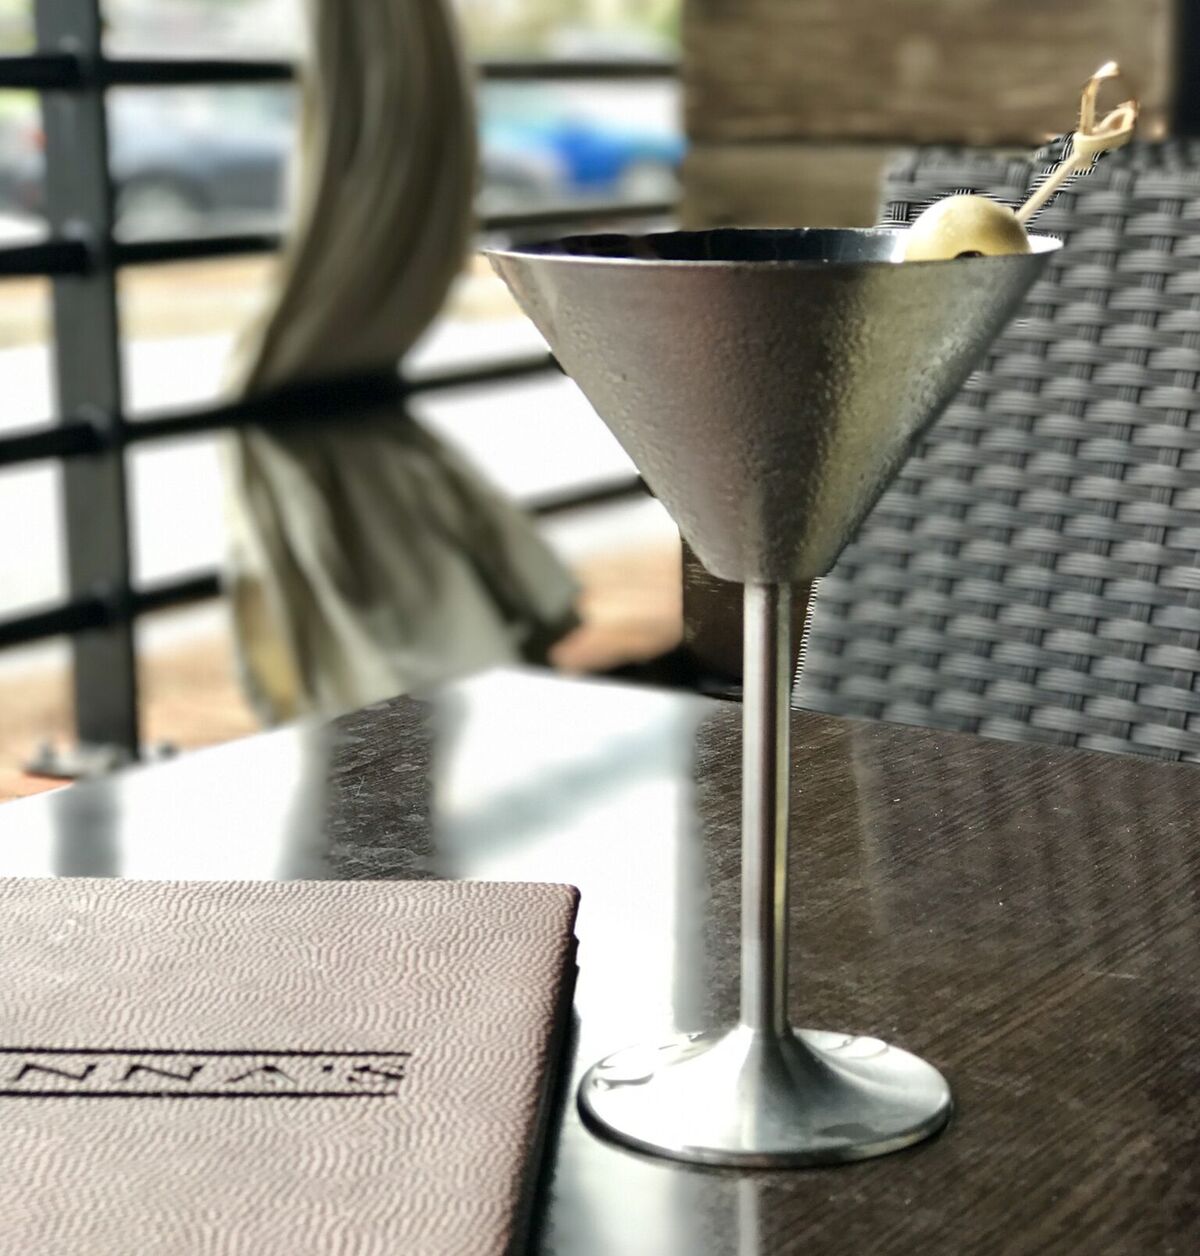 Where-to-watch-playoff-games-in-atlanta-three-olive-martini